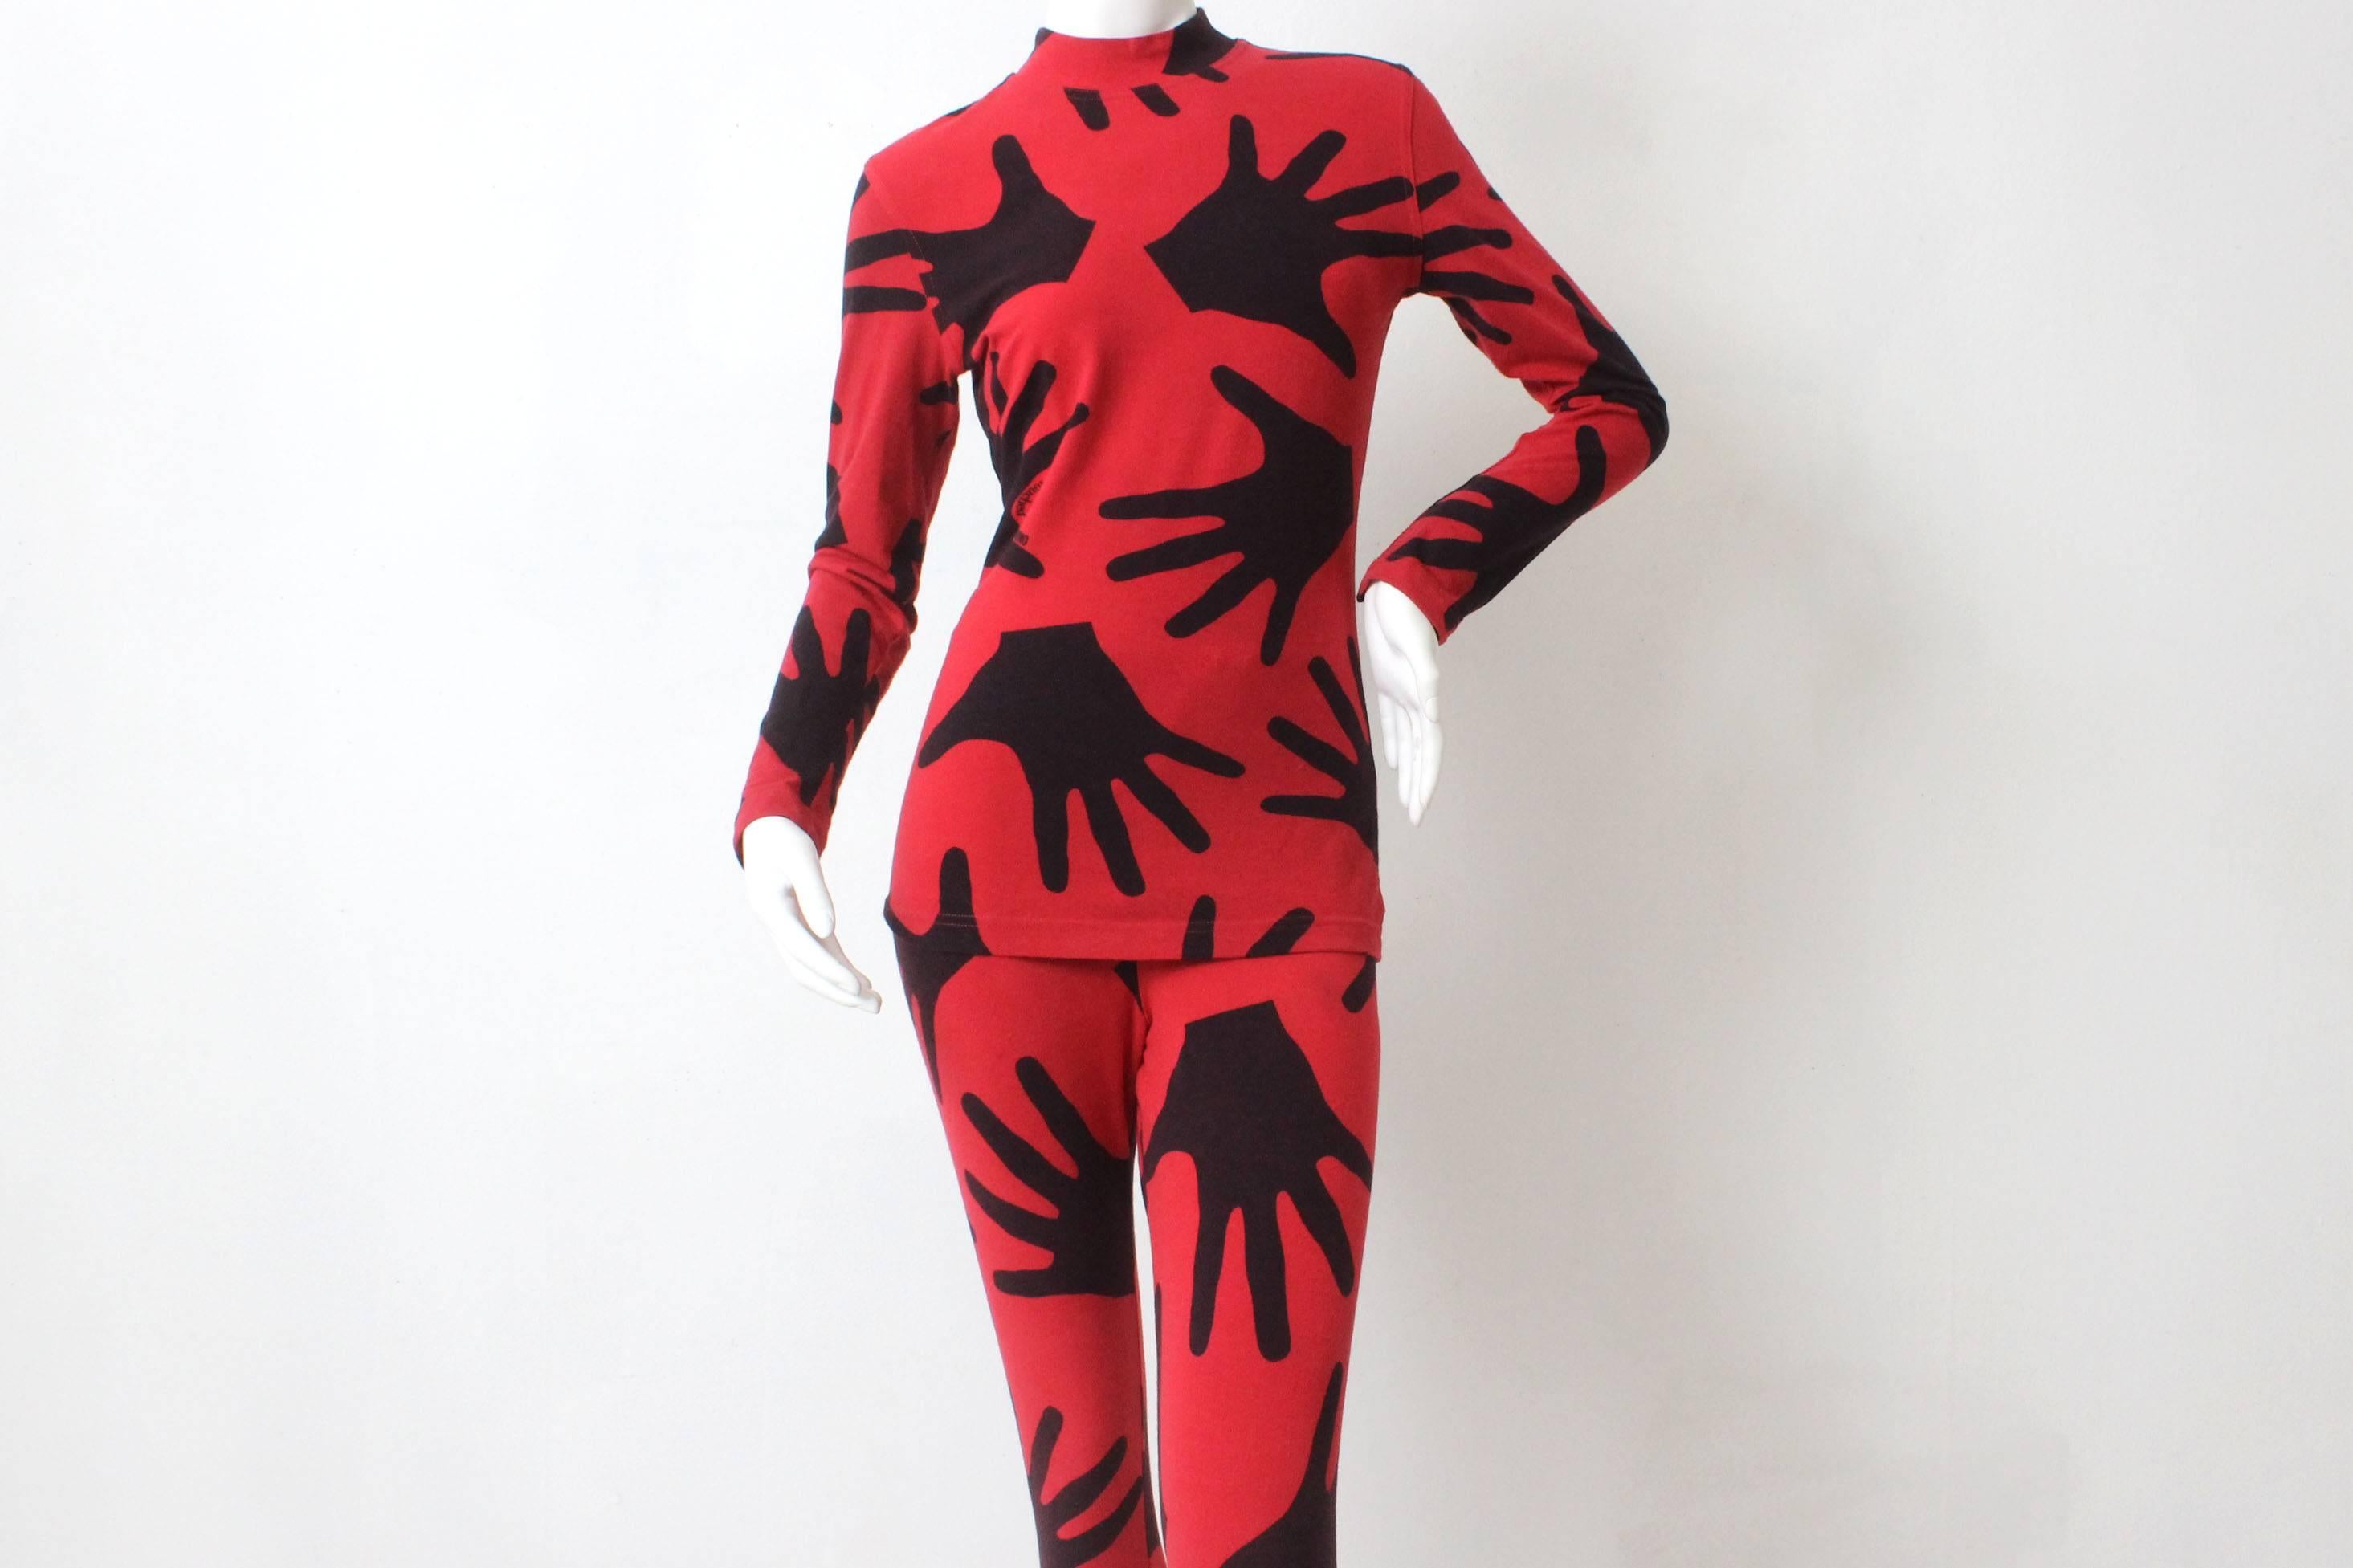 One of Franco Moschino's trademarks was his whimsical designs. This red and black two piece set is a perfect example of that. Around the fanciful pattern of hands is written "Touched By Moschino"  The label lists the size as a EU 46 but it